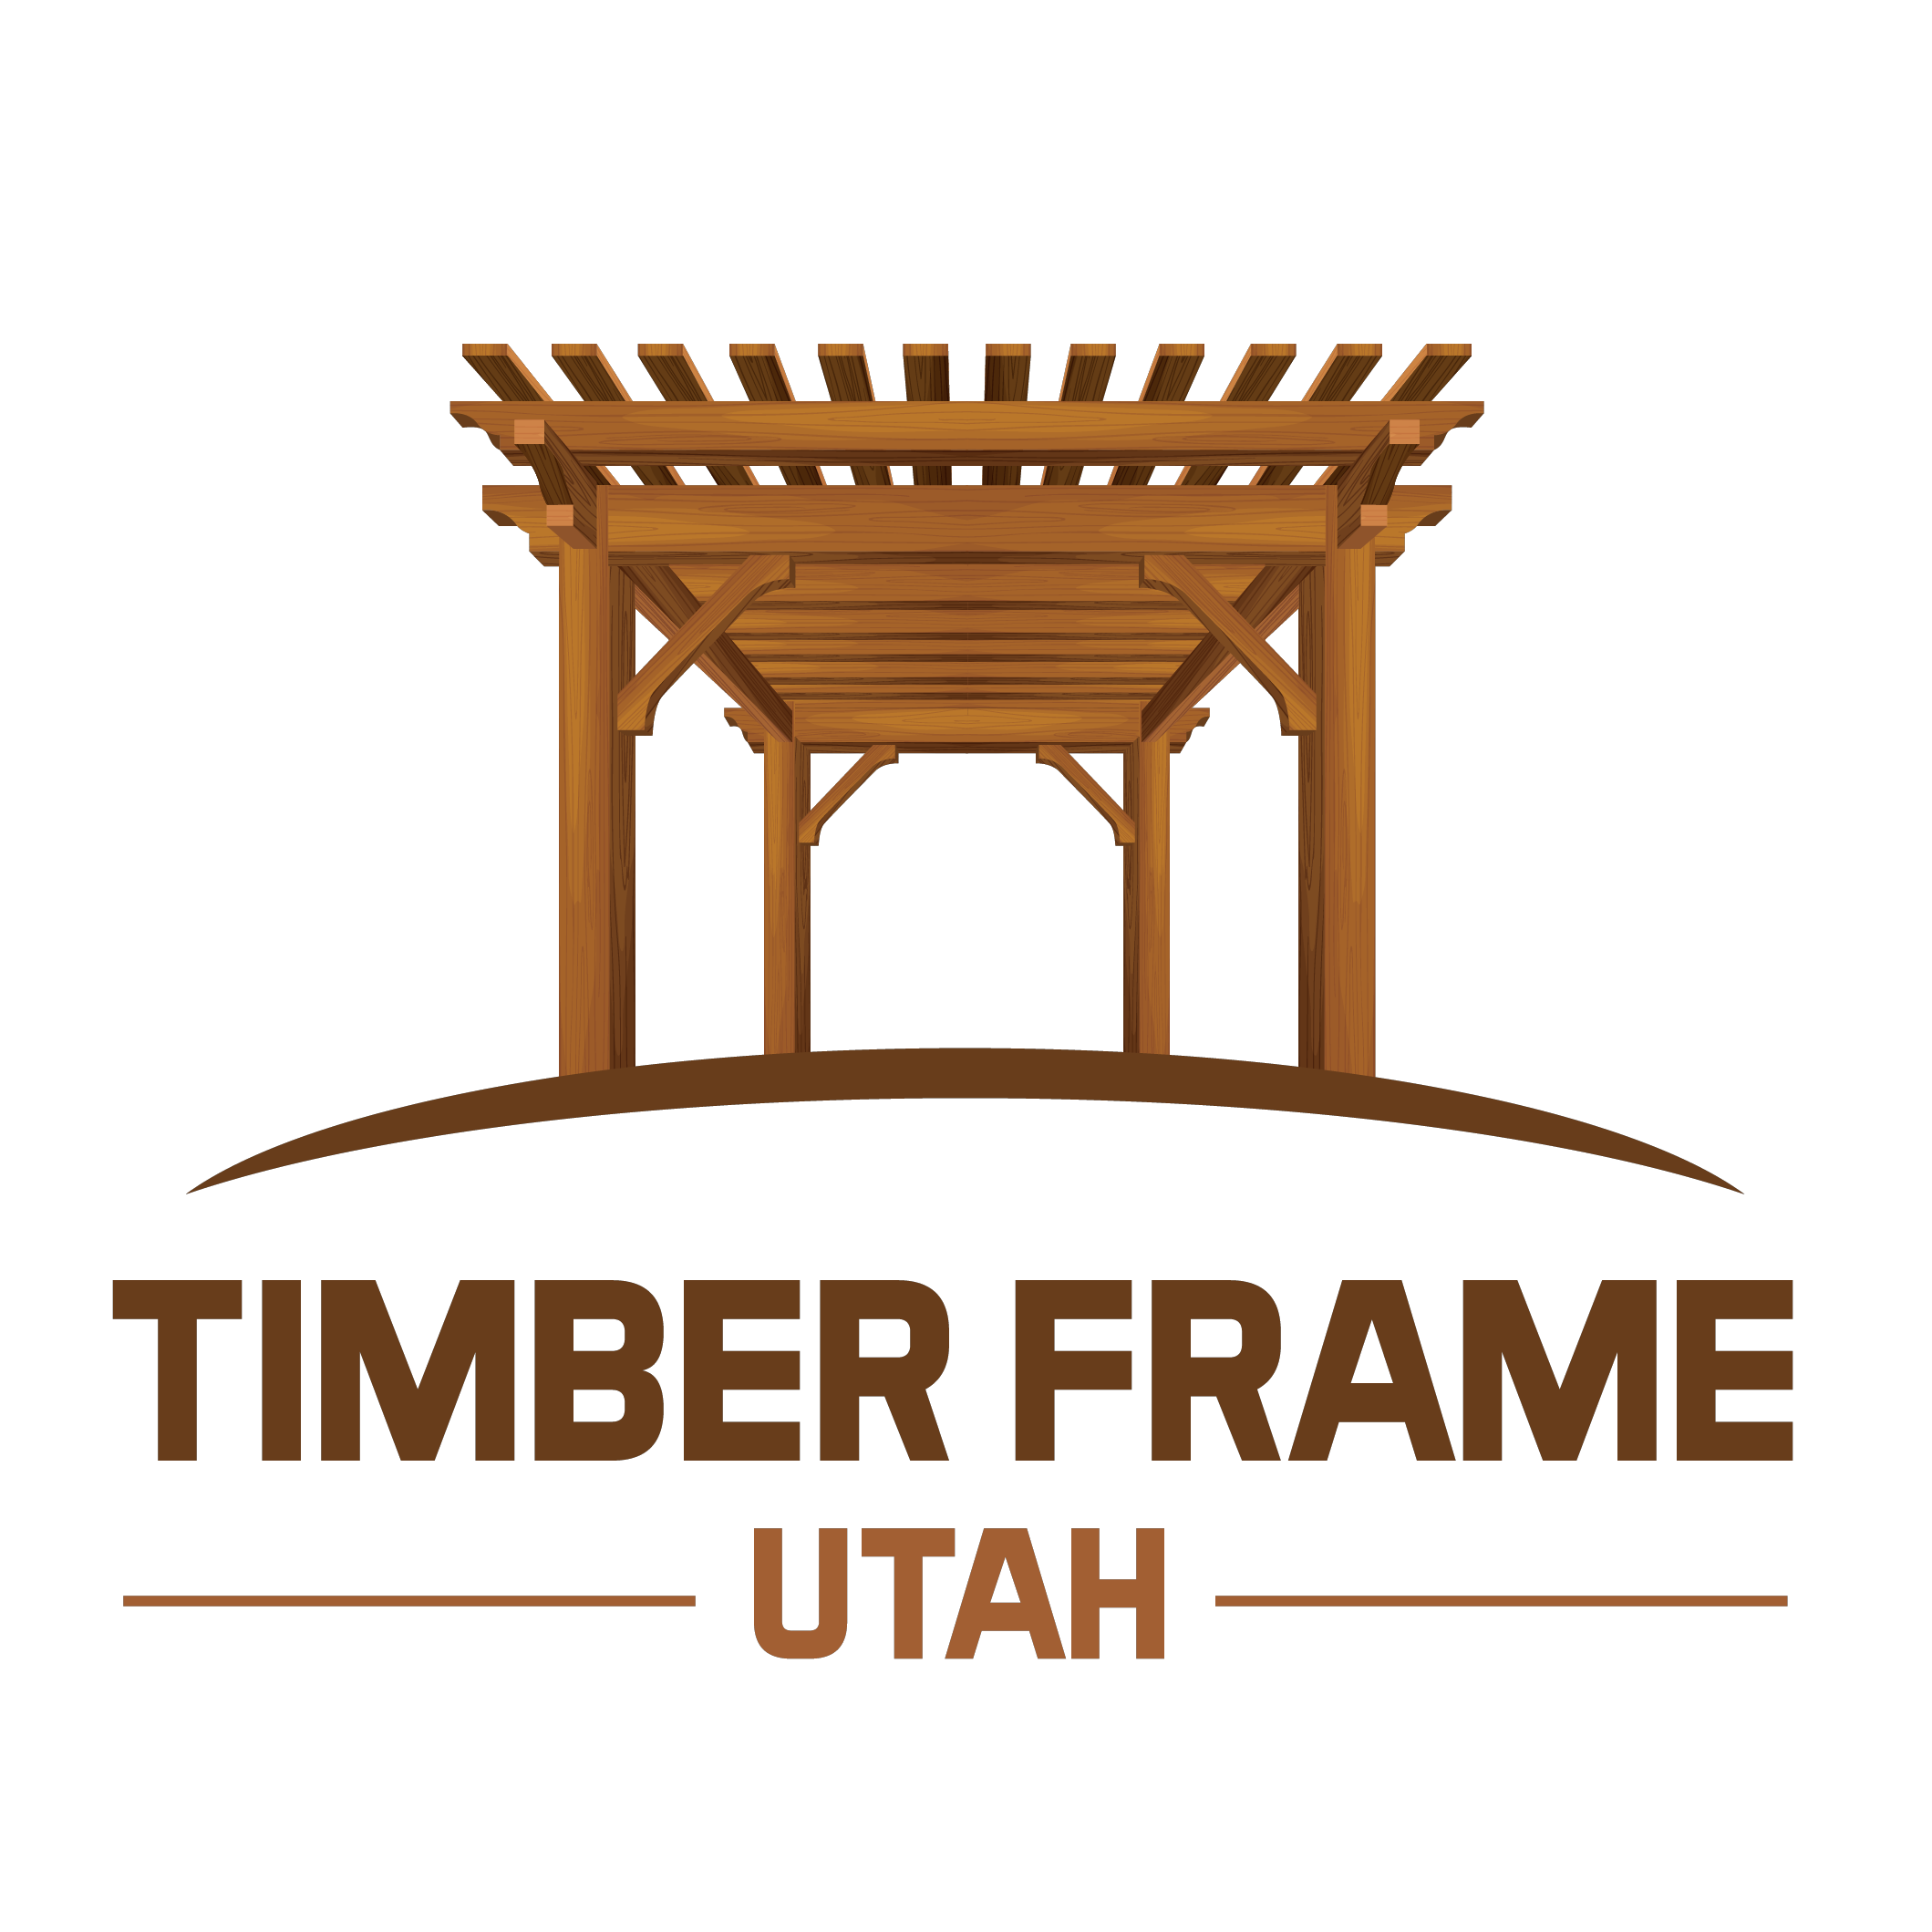 Timber Frame Utah - Clearfield, UT 84015 - (801)500-4599 | ShowMeLocal.com